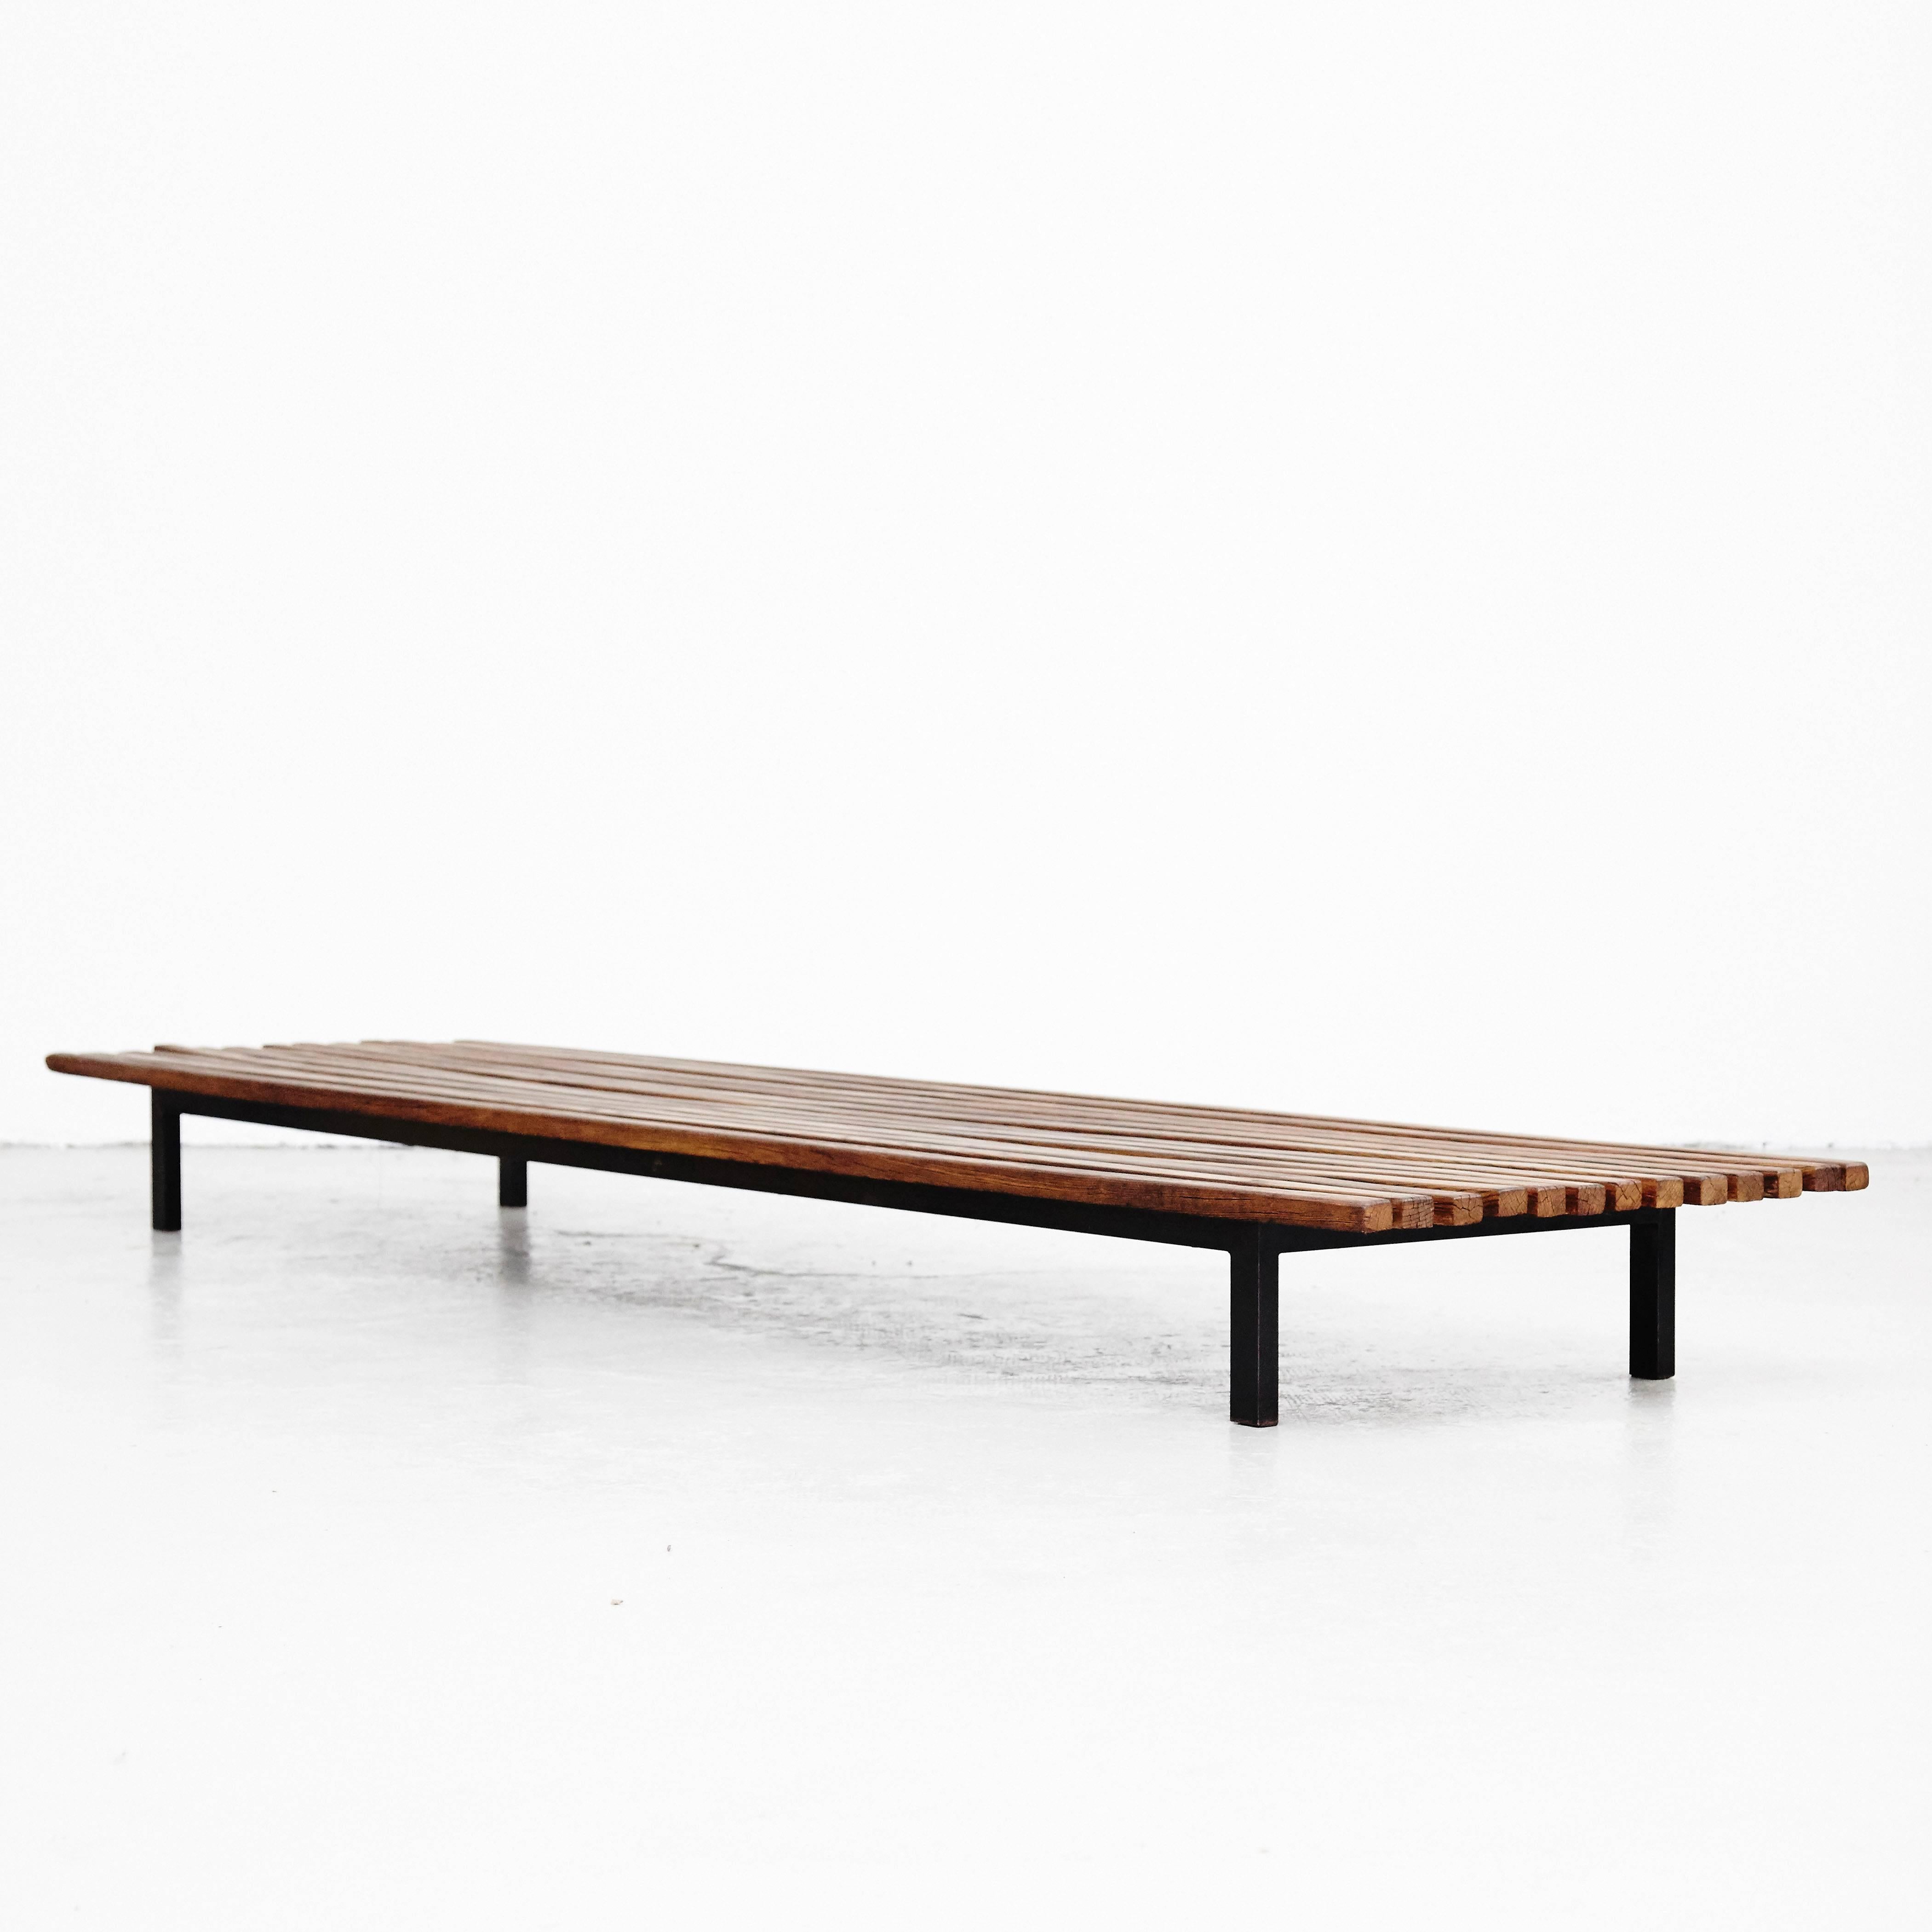 Bench designed by Charlotte Perriand, circa 1950.
This model is with 13 slats of wood.

Wood, metal frame legs.

Provenance: Cansado, Mauritania (Africa).

In good original condition, with minor wear consistent with age and use, preserving a